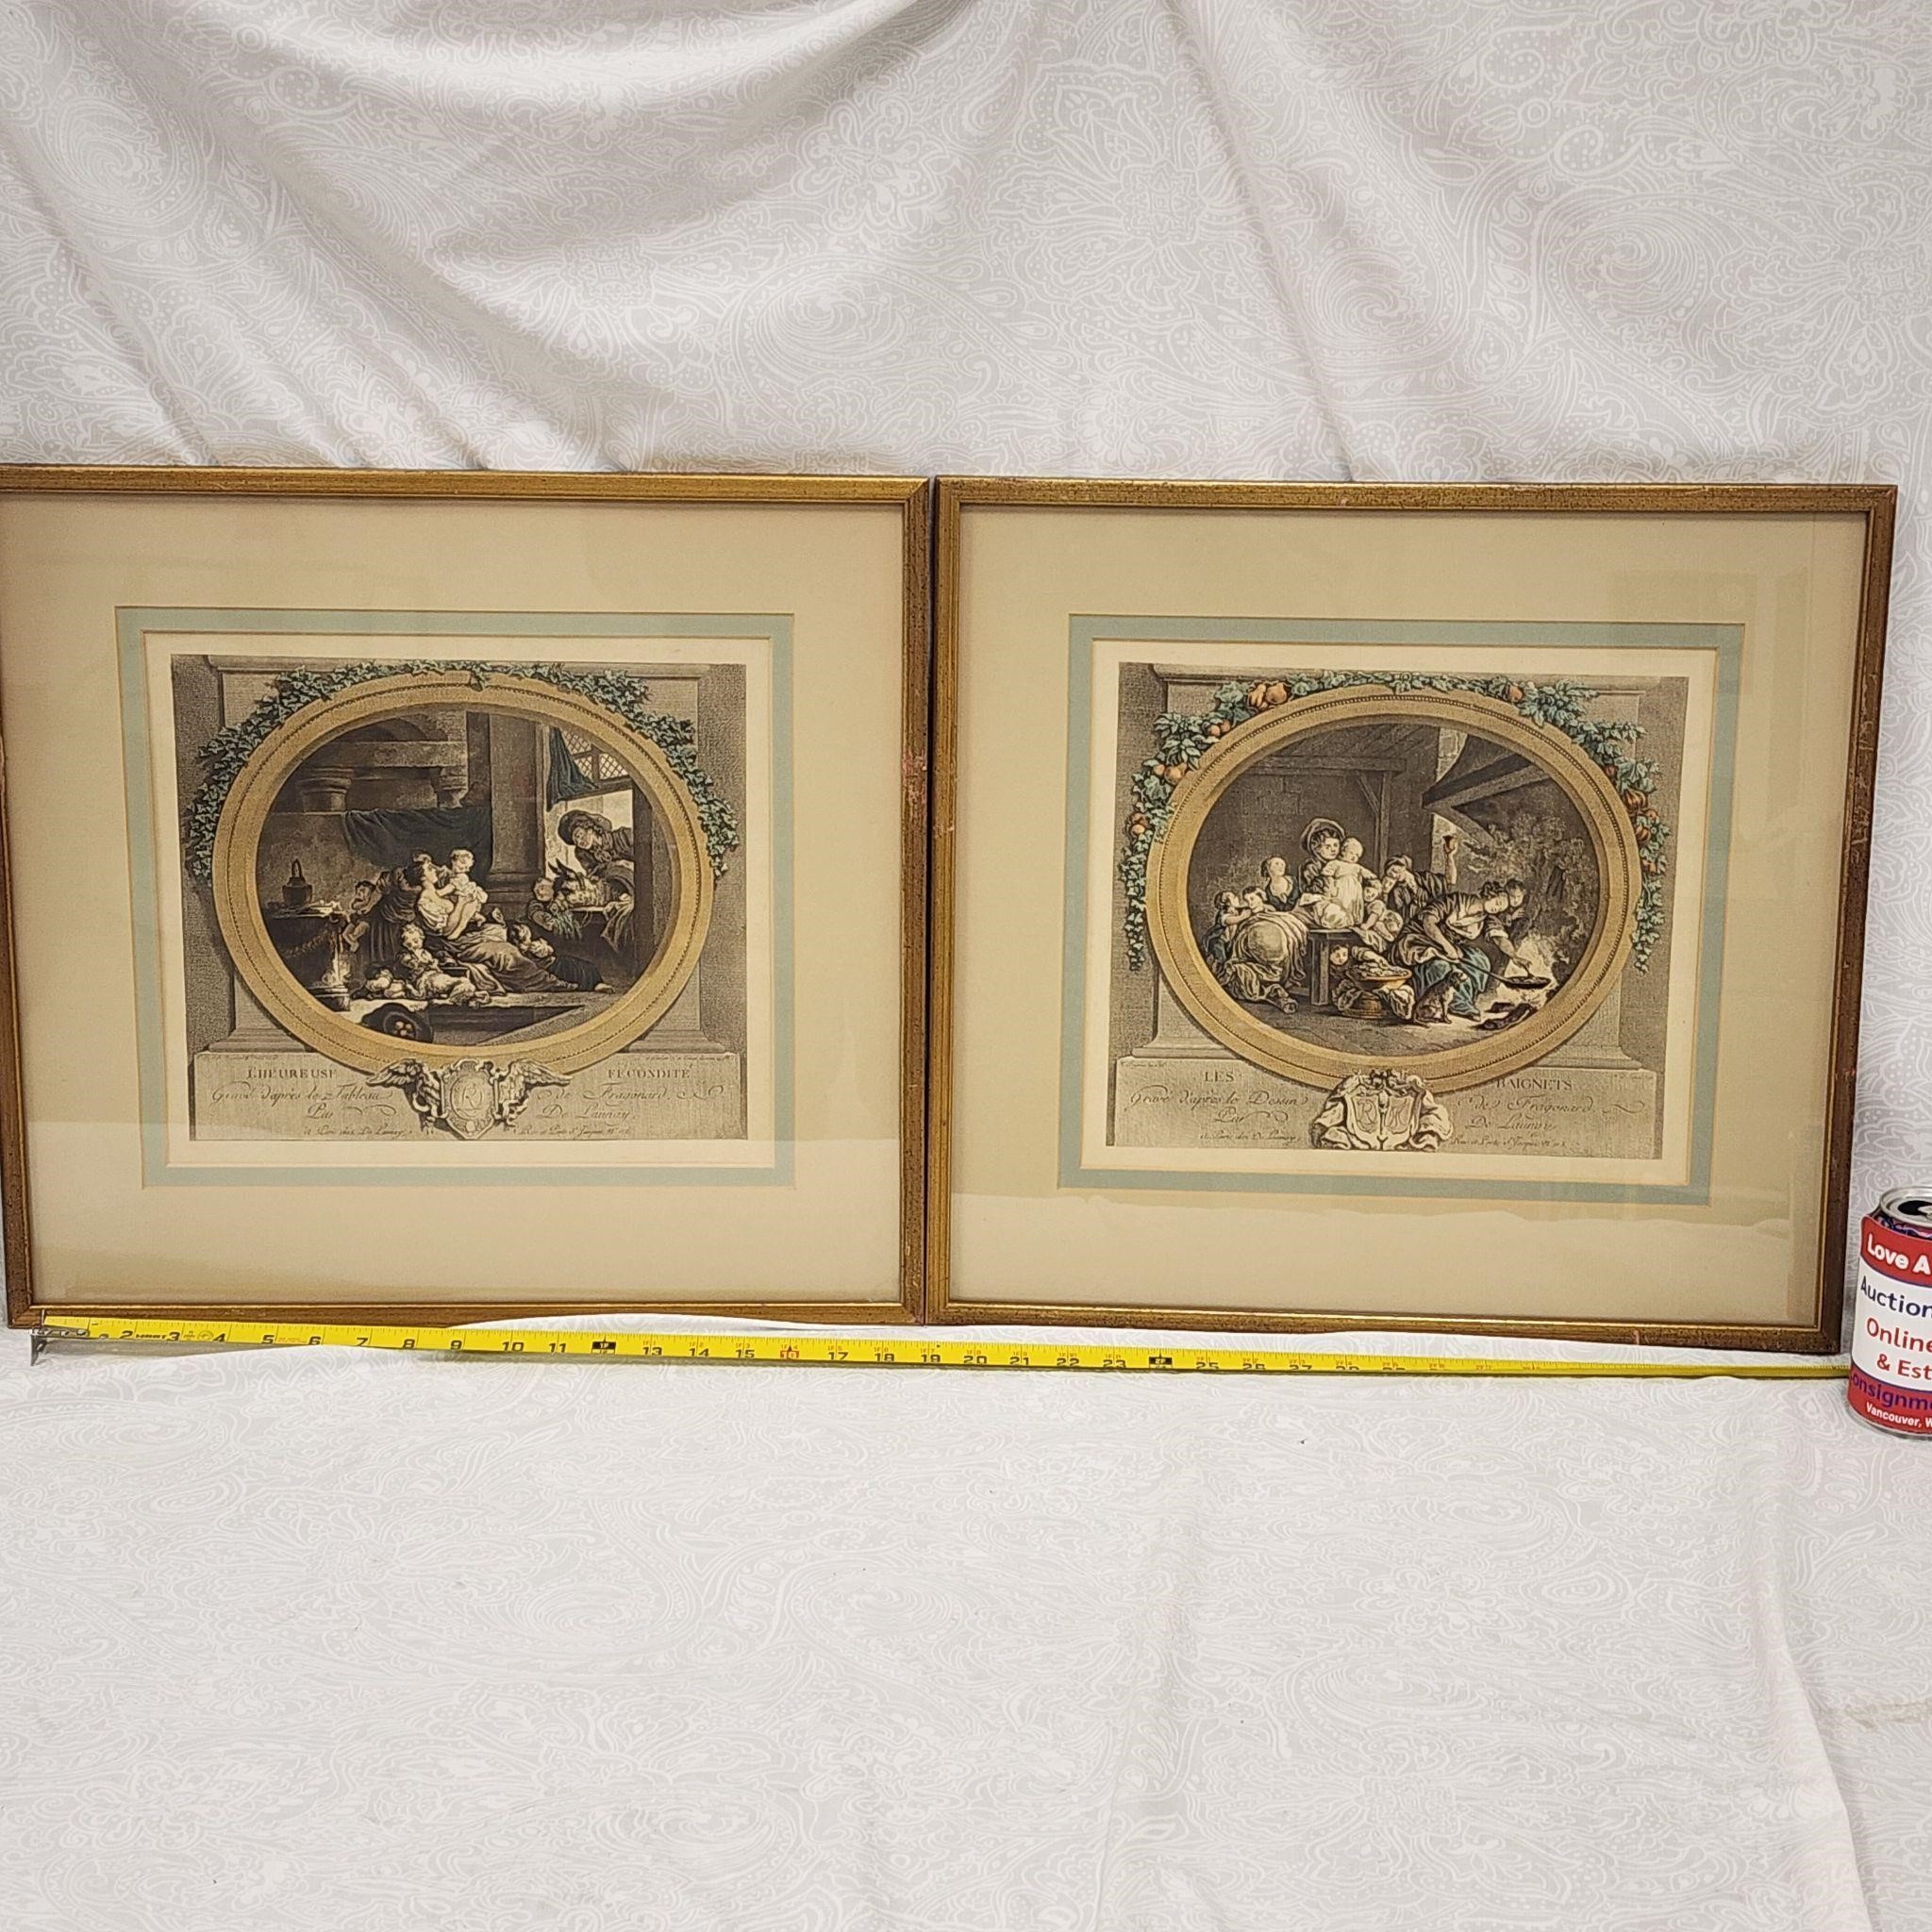 Rare Pair Of Early 1800's Lithographs By Delaunay